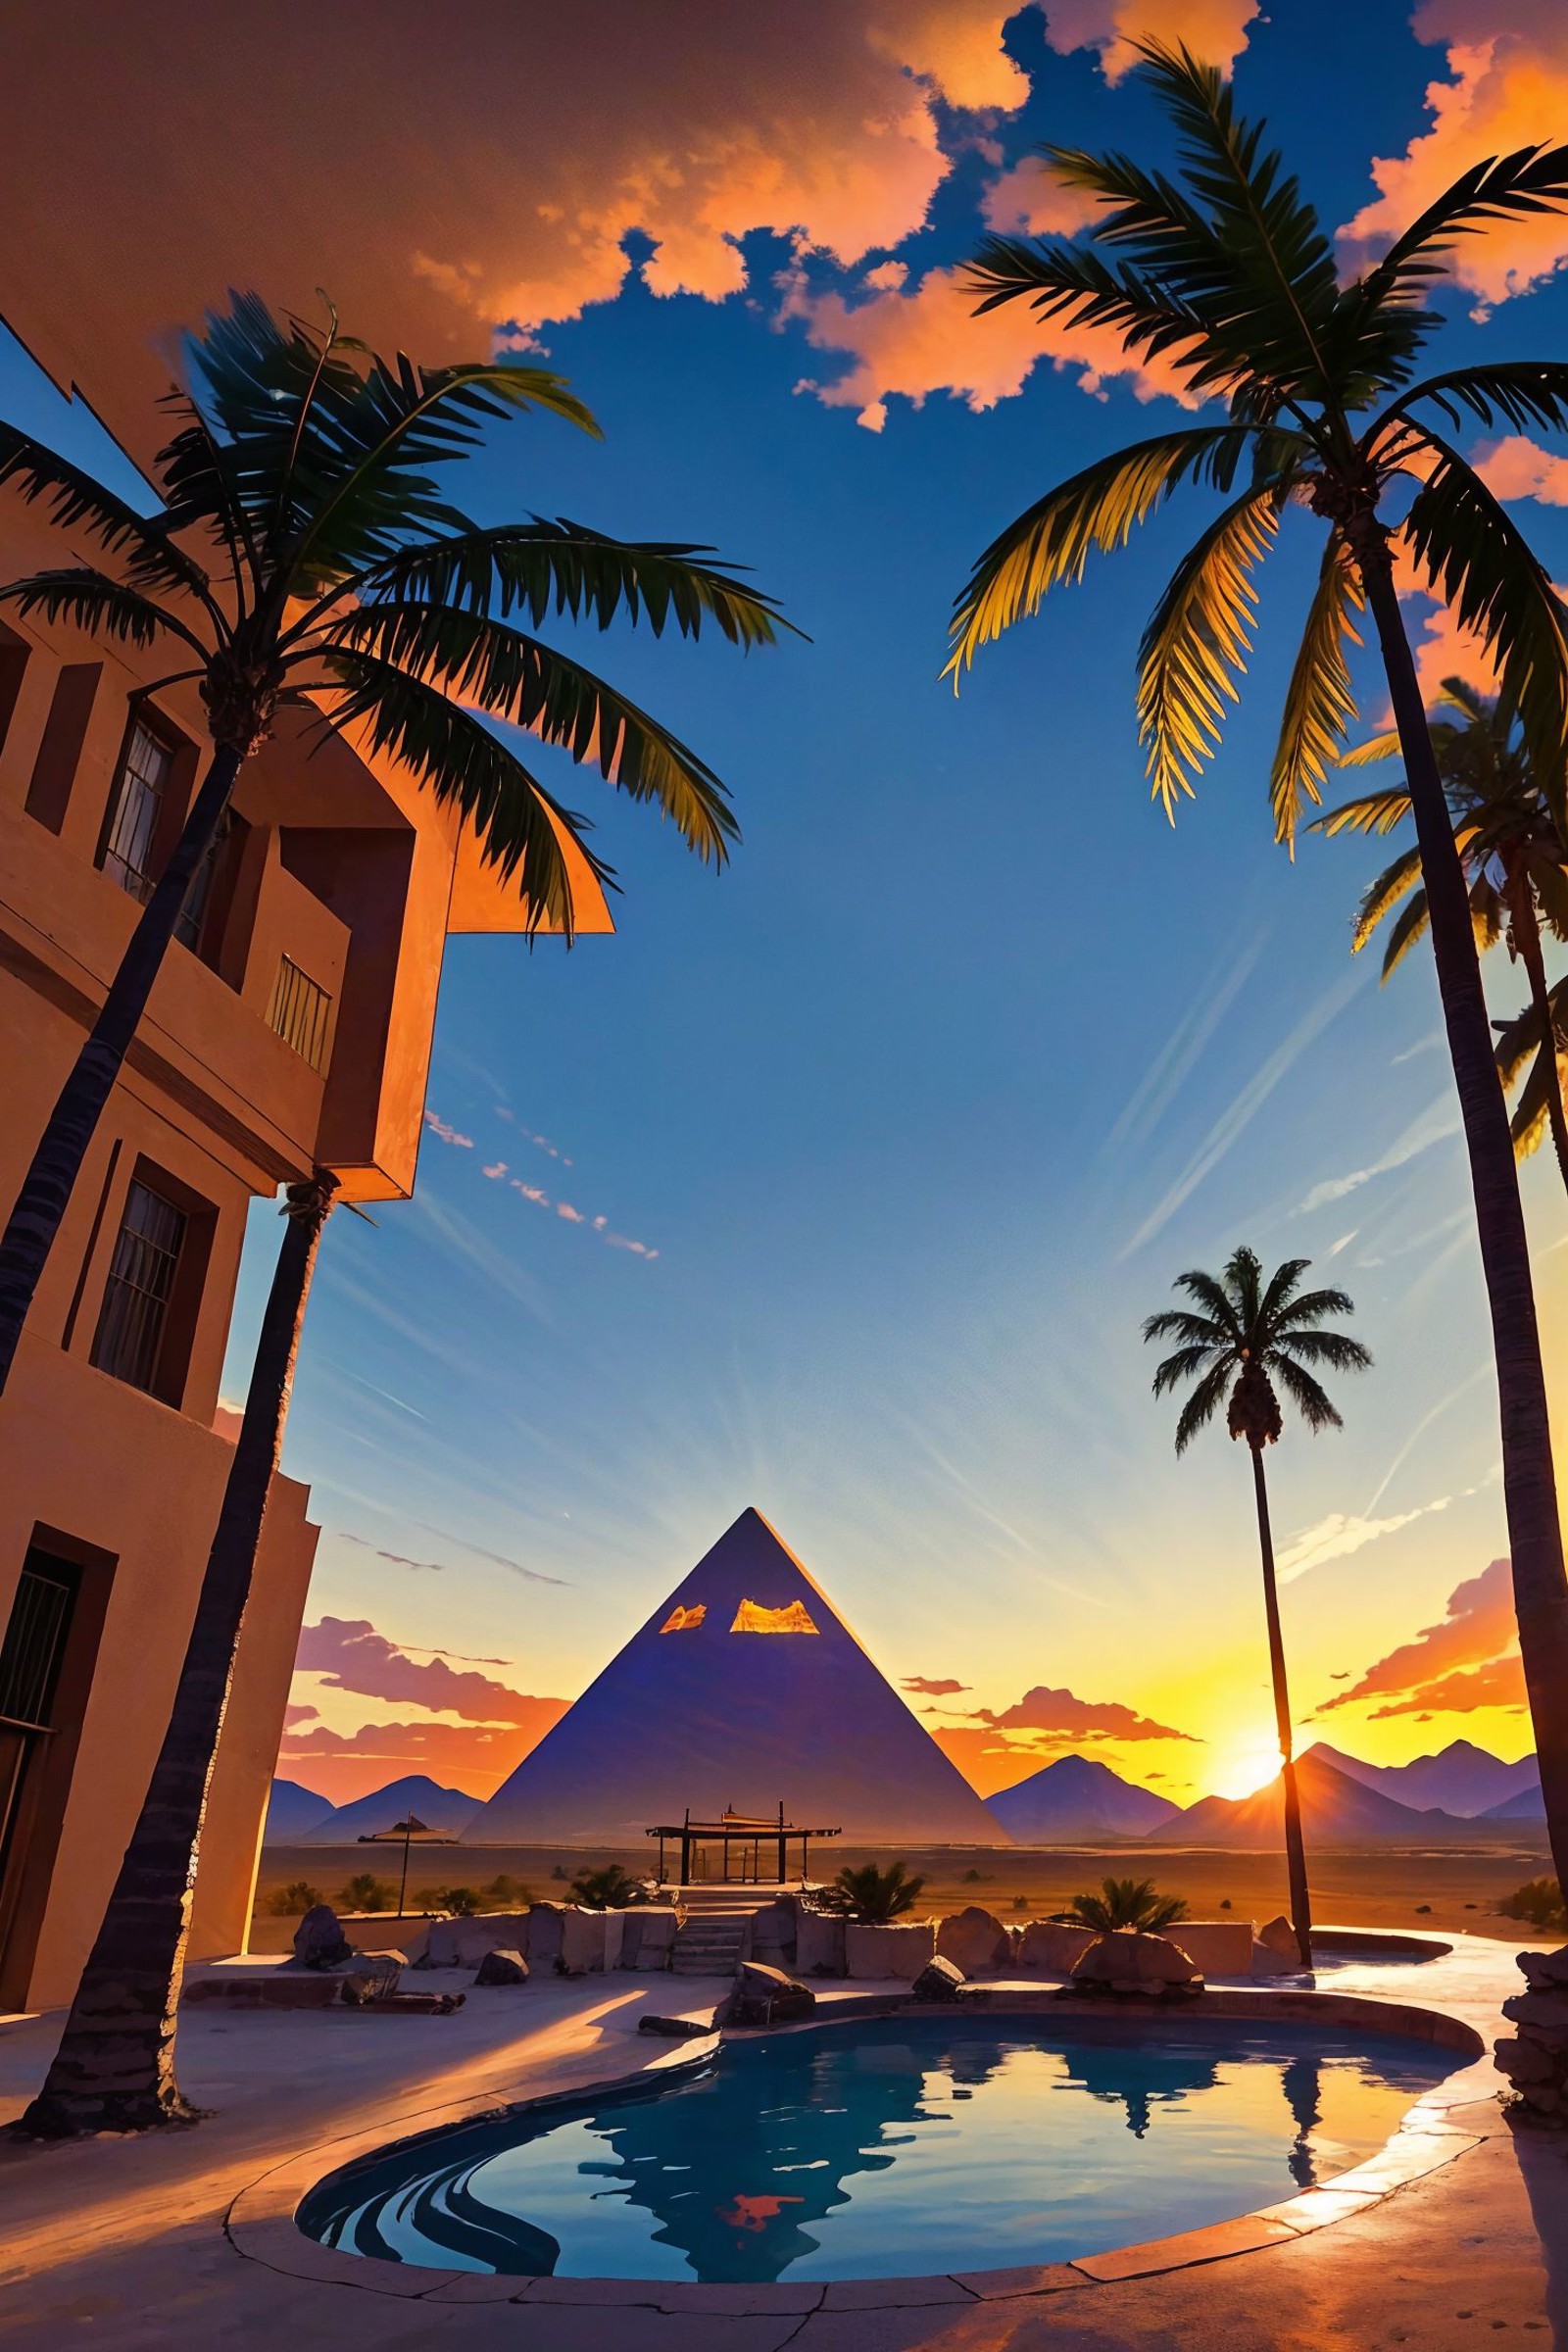 The image features a beautiful scene of a sunset over a large pyramid. The pyramid is situated in a desert landscape,with ...